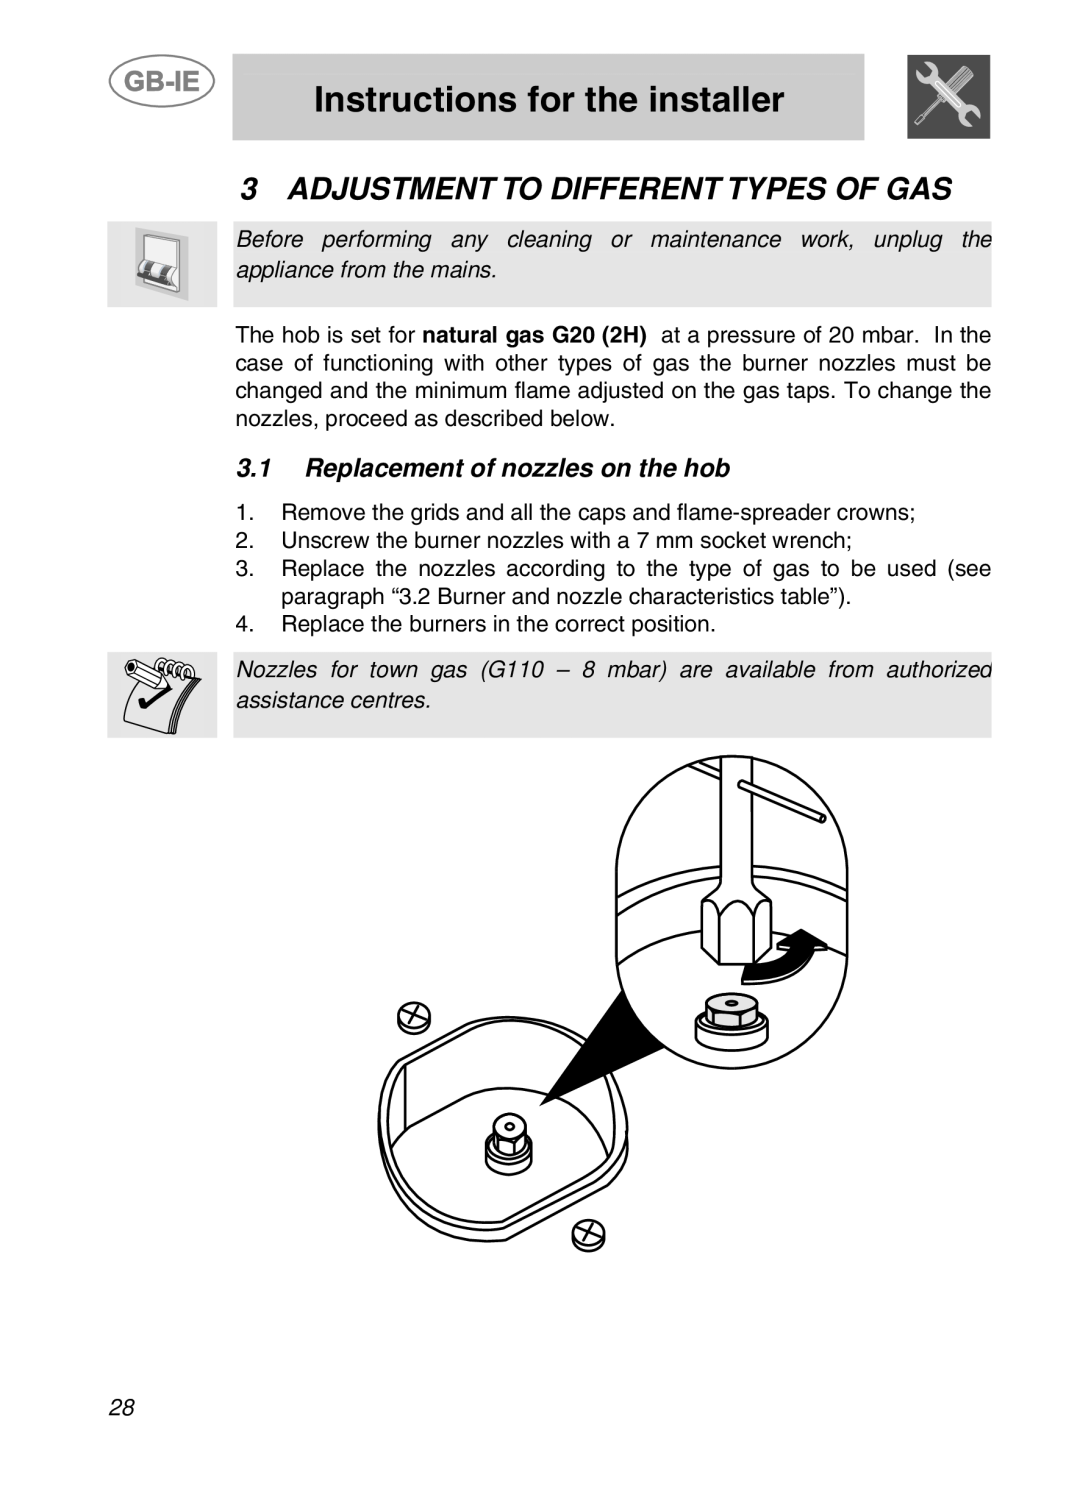 Smeg PGF75BE3 Adjustment To Different Types Of Gas, Replacement of nozzles on the hob, Instructions for the installer 